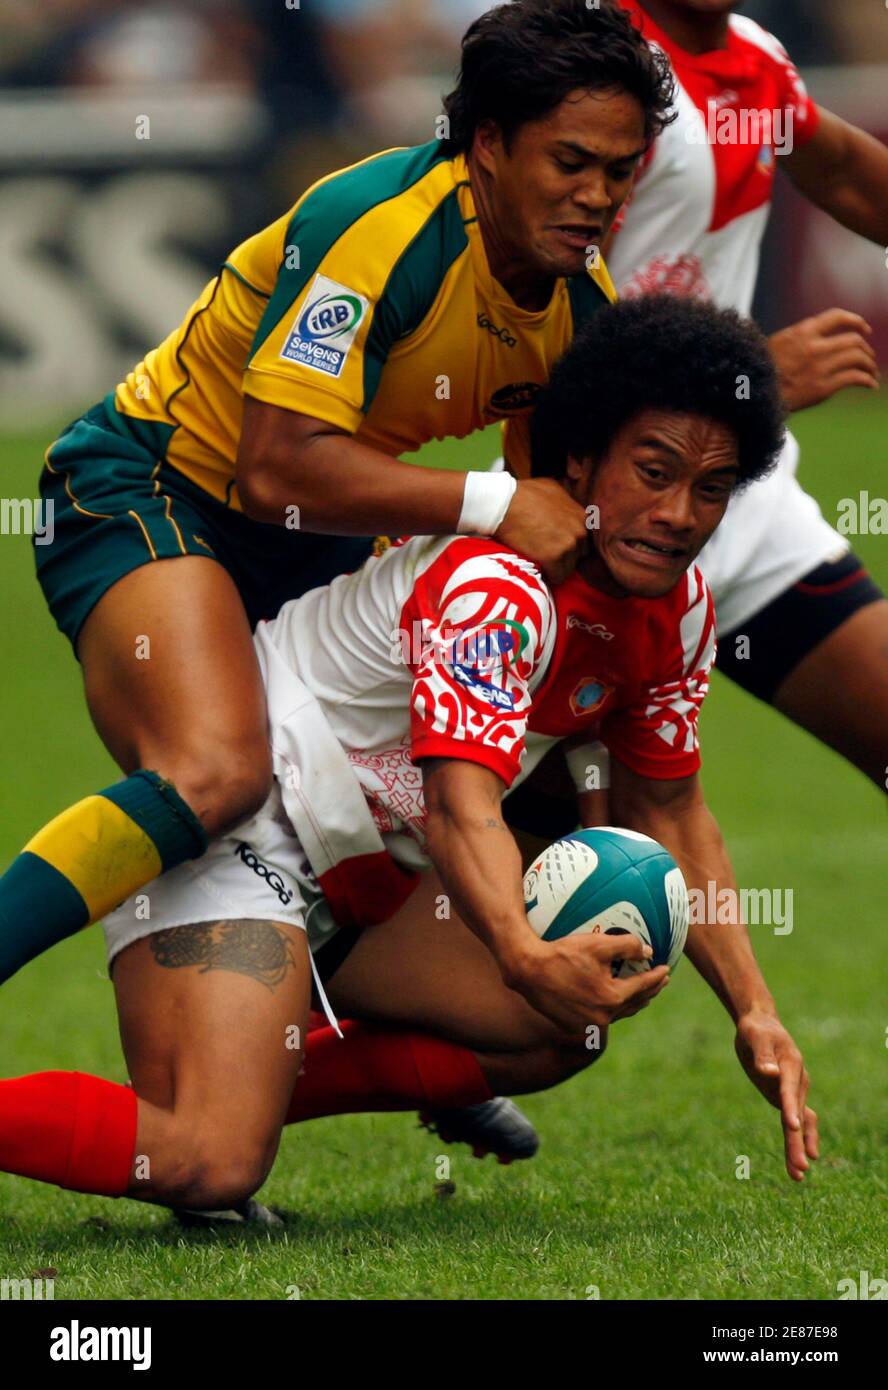 Australia's Brackin Karauria-Henry (top) is tackled by Tonga's Etisoni Hefa during the preliminaries of the Hong Kong Sevens rugby tournament March 27, 2010.   REUTERS/Tyrone Siu  (CHINA - Tags: SPORT RUGBY) Stock Photo